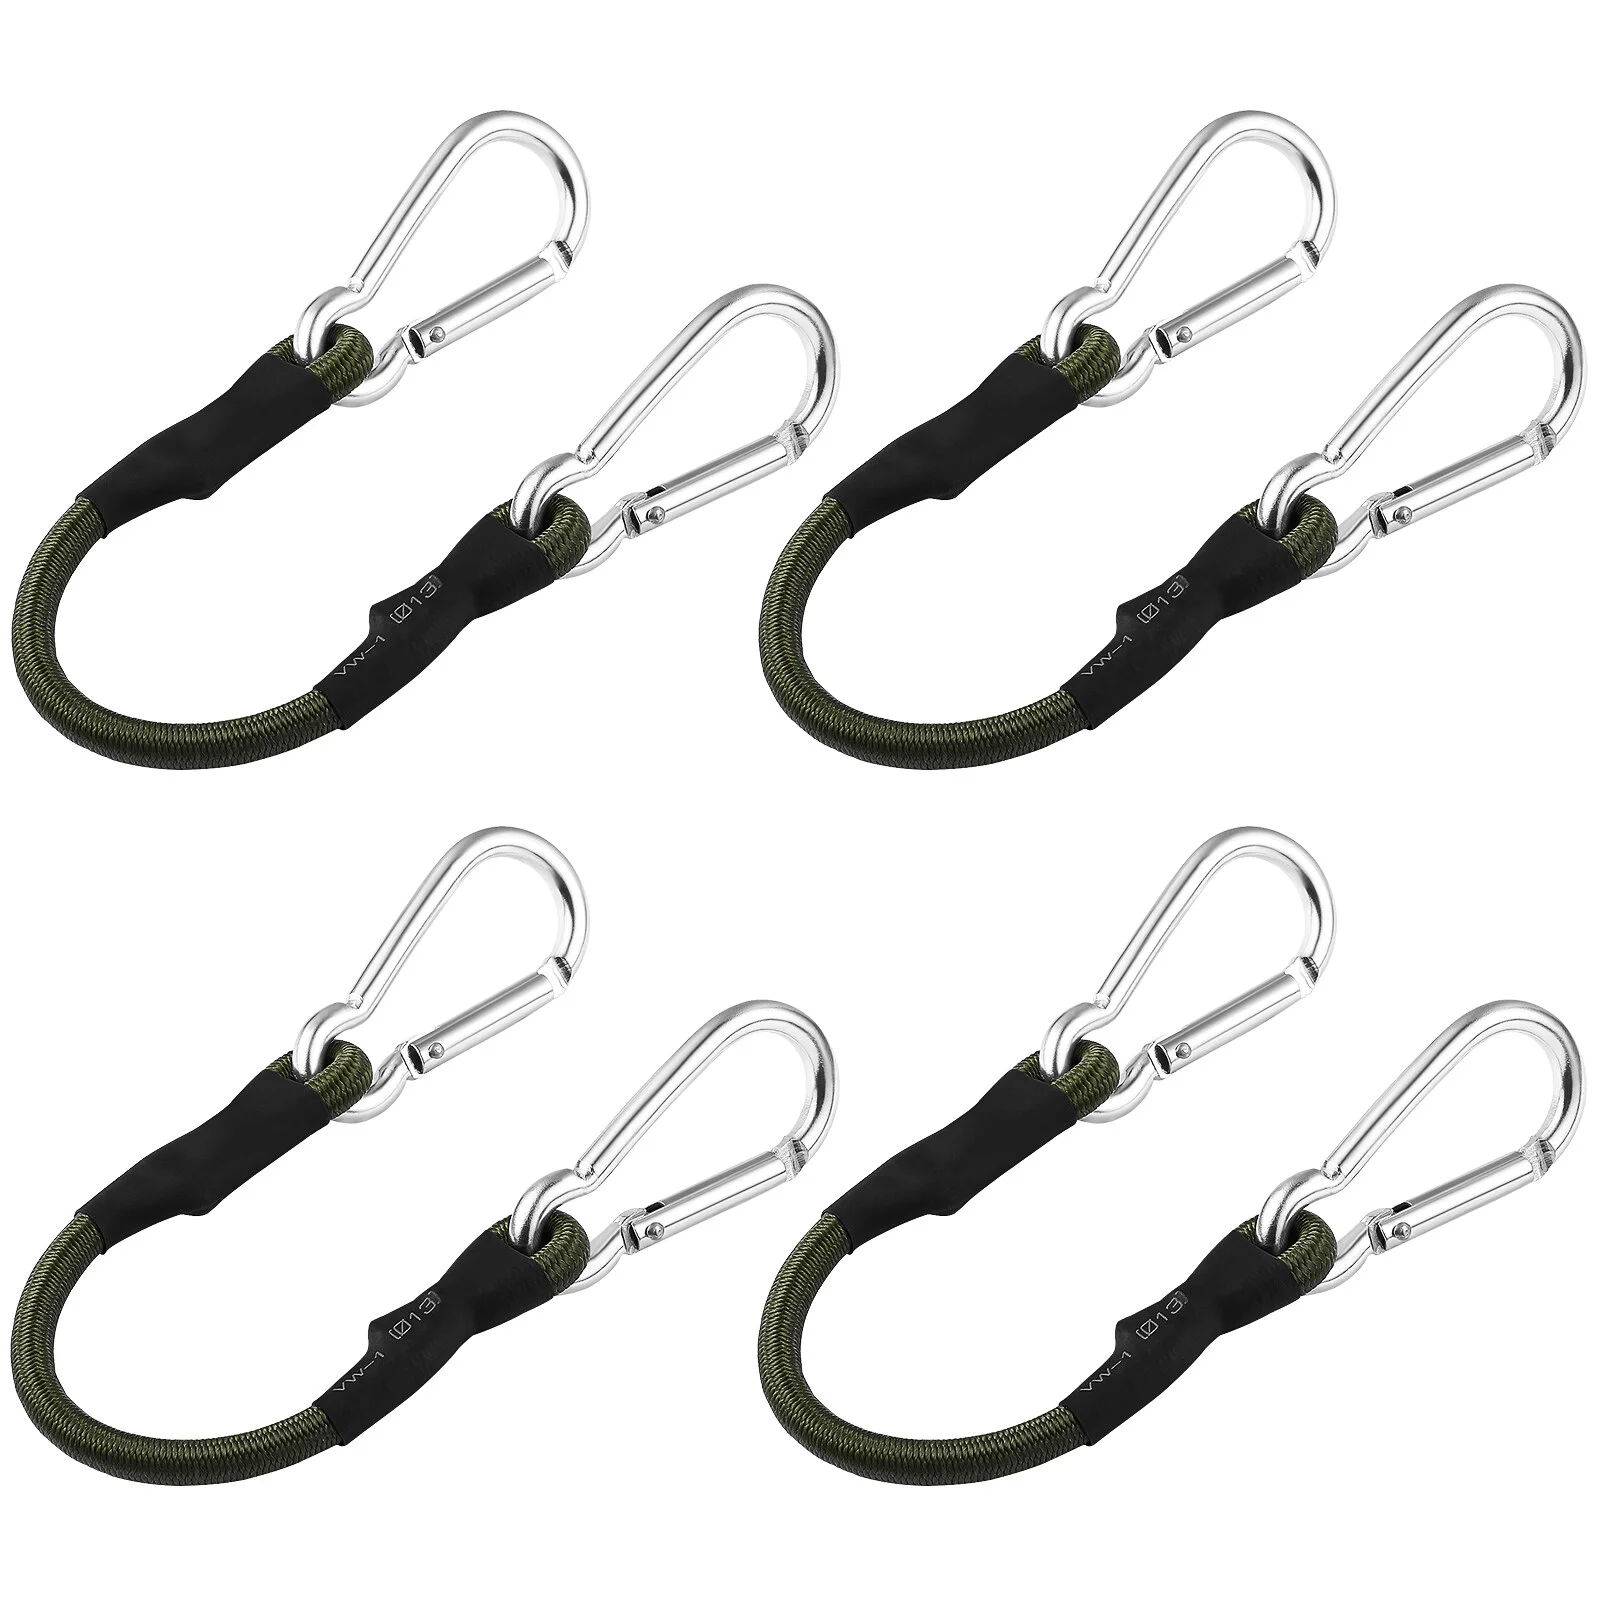 

4 Pcs Tent Outdoor Bungee Straps Carabiner Hook Cords Climbing Carabiners Heavy Duty Hooks Stretch Elasticity